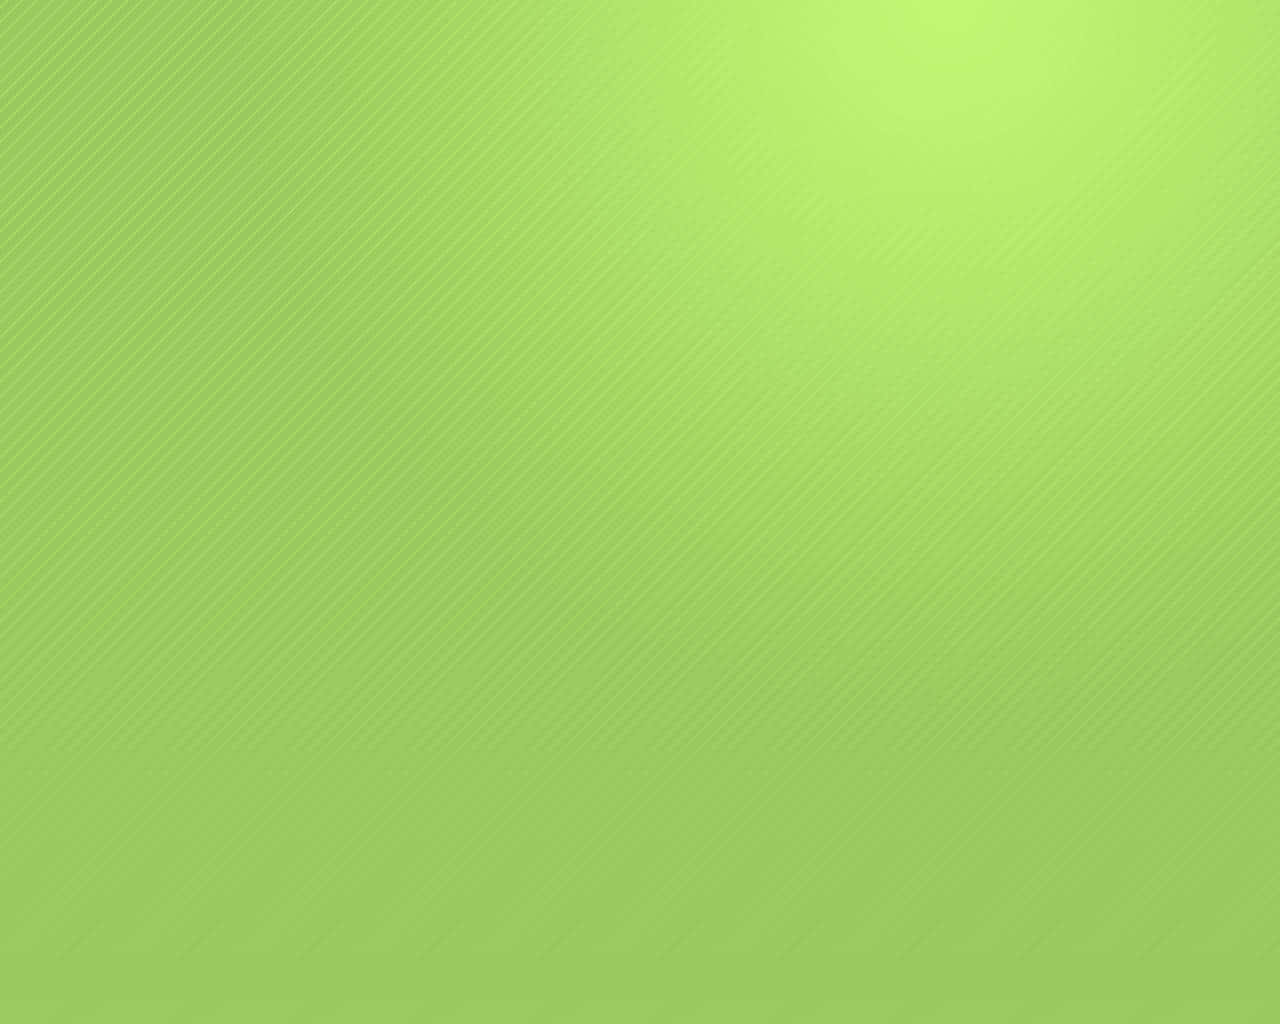 A vibrant green abstract background